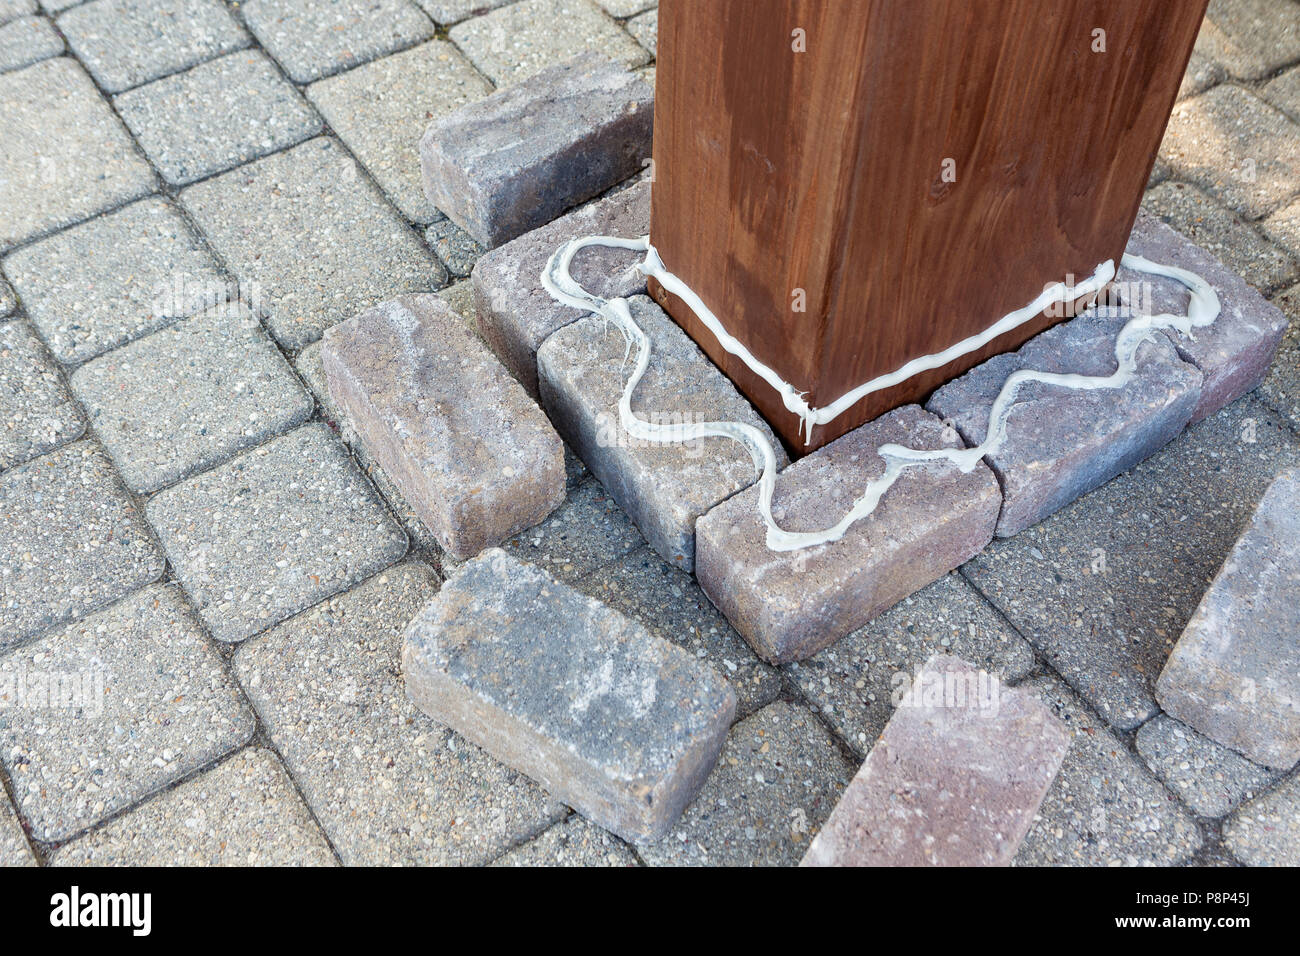 Glue applied to grey bricks around a wooden pillar during installation of a new gazebo on the patio Stock Photo